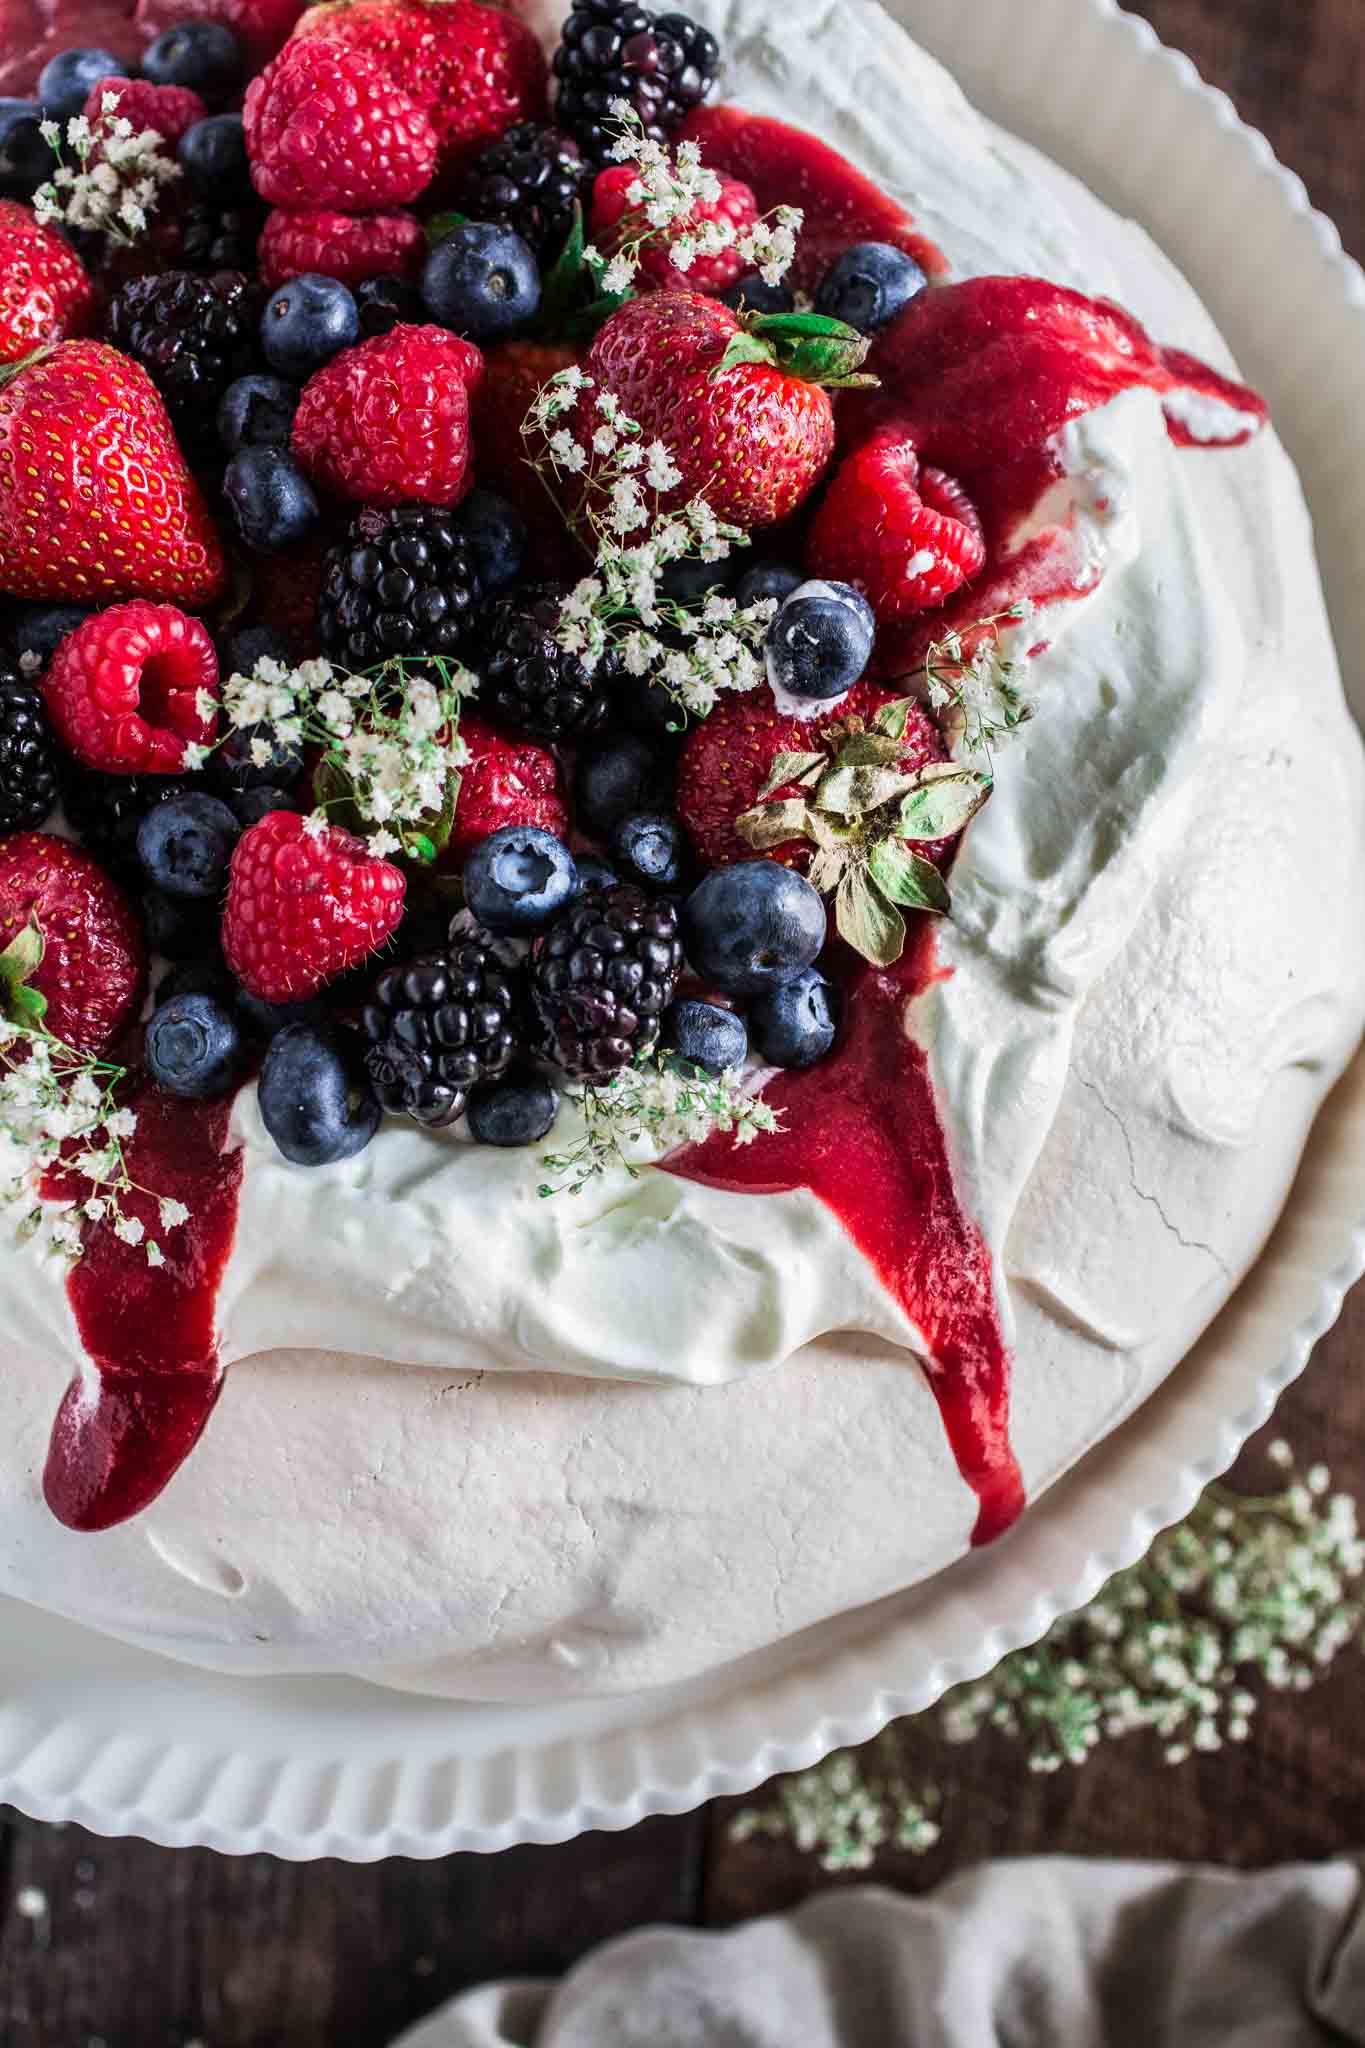 Berry Pavlova | www.oliviascuisine.com | A delicious meringue-based dessert named after the Russian ballerina Anna Pavlova. Easy to make and always a crowd pleaser!